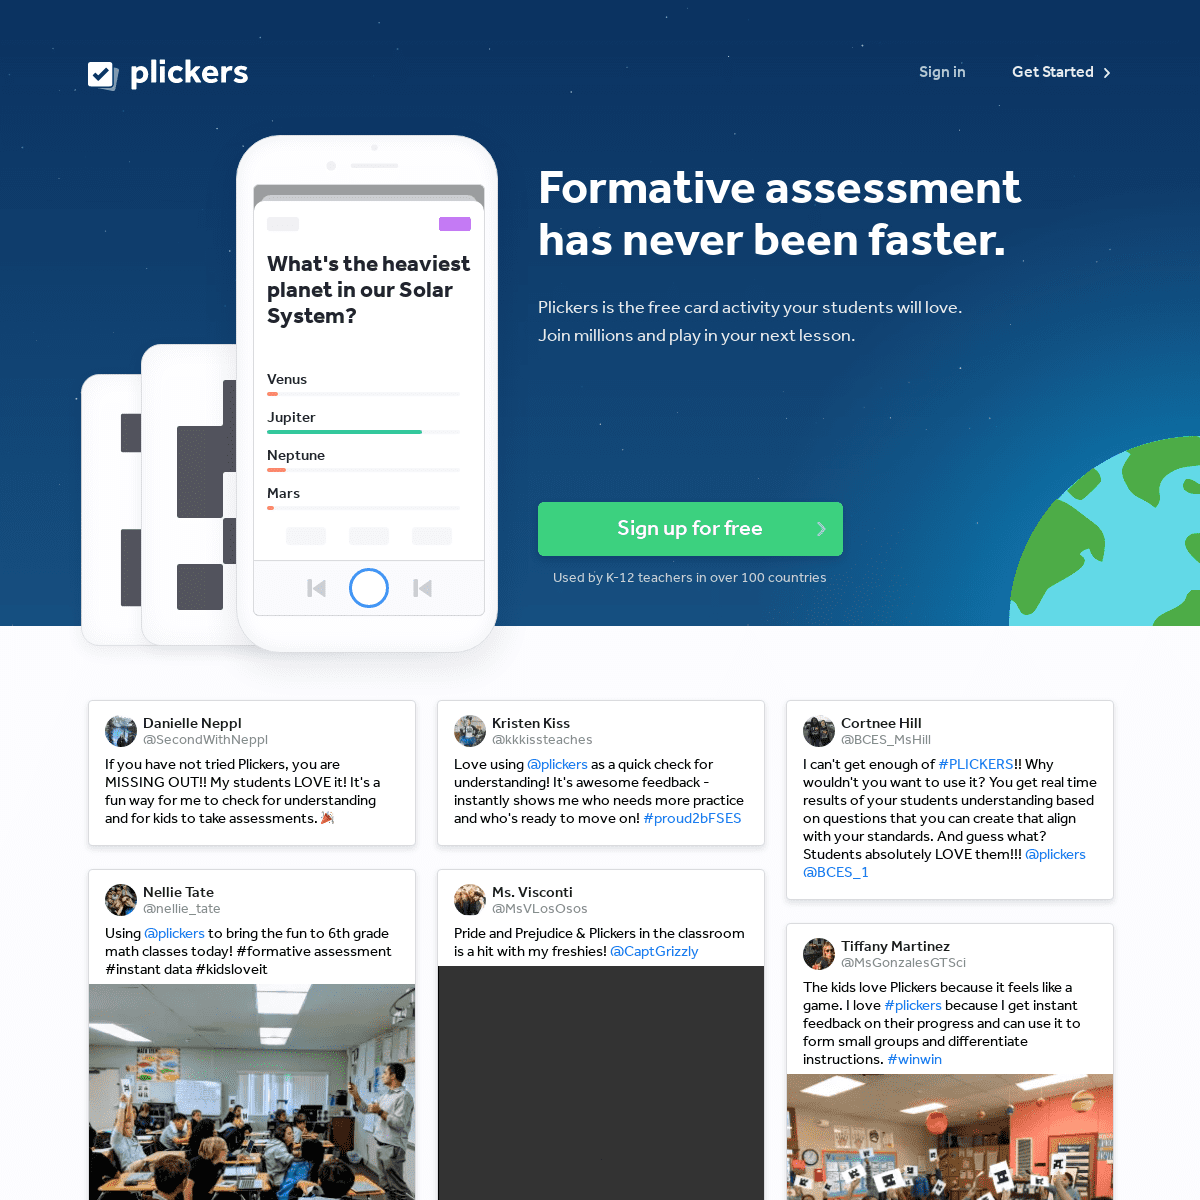 A complete backup of https://plickers.com